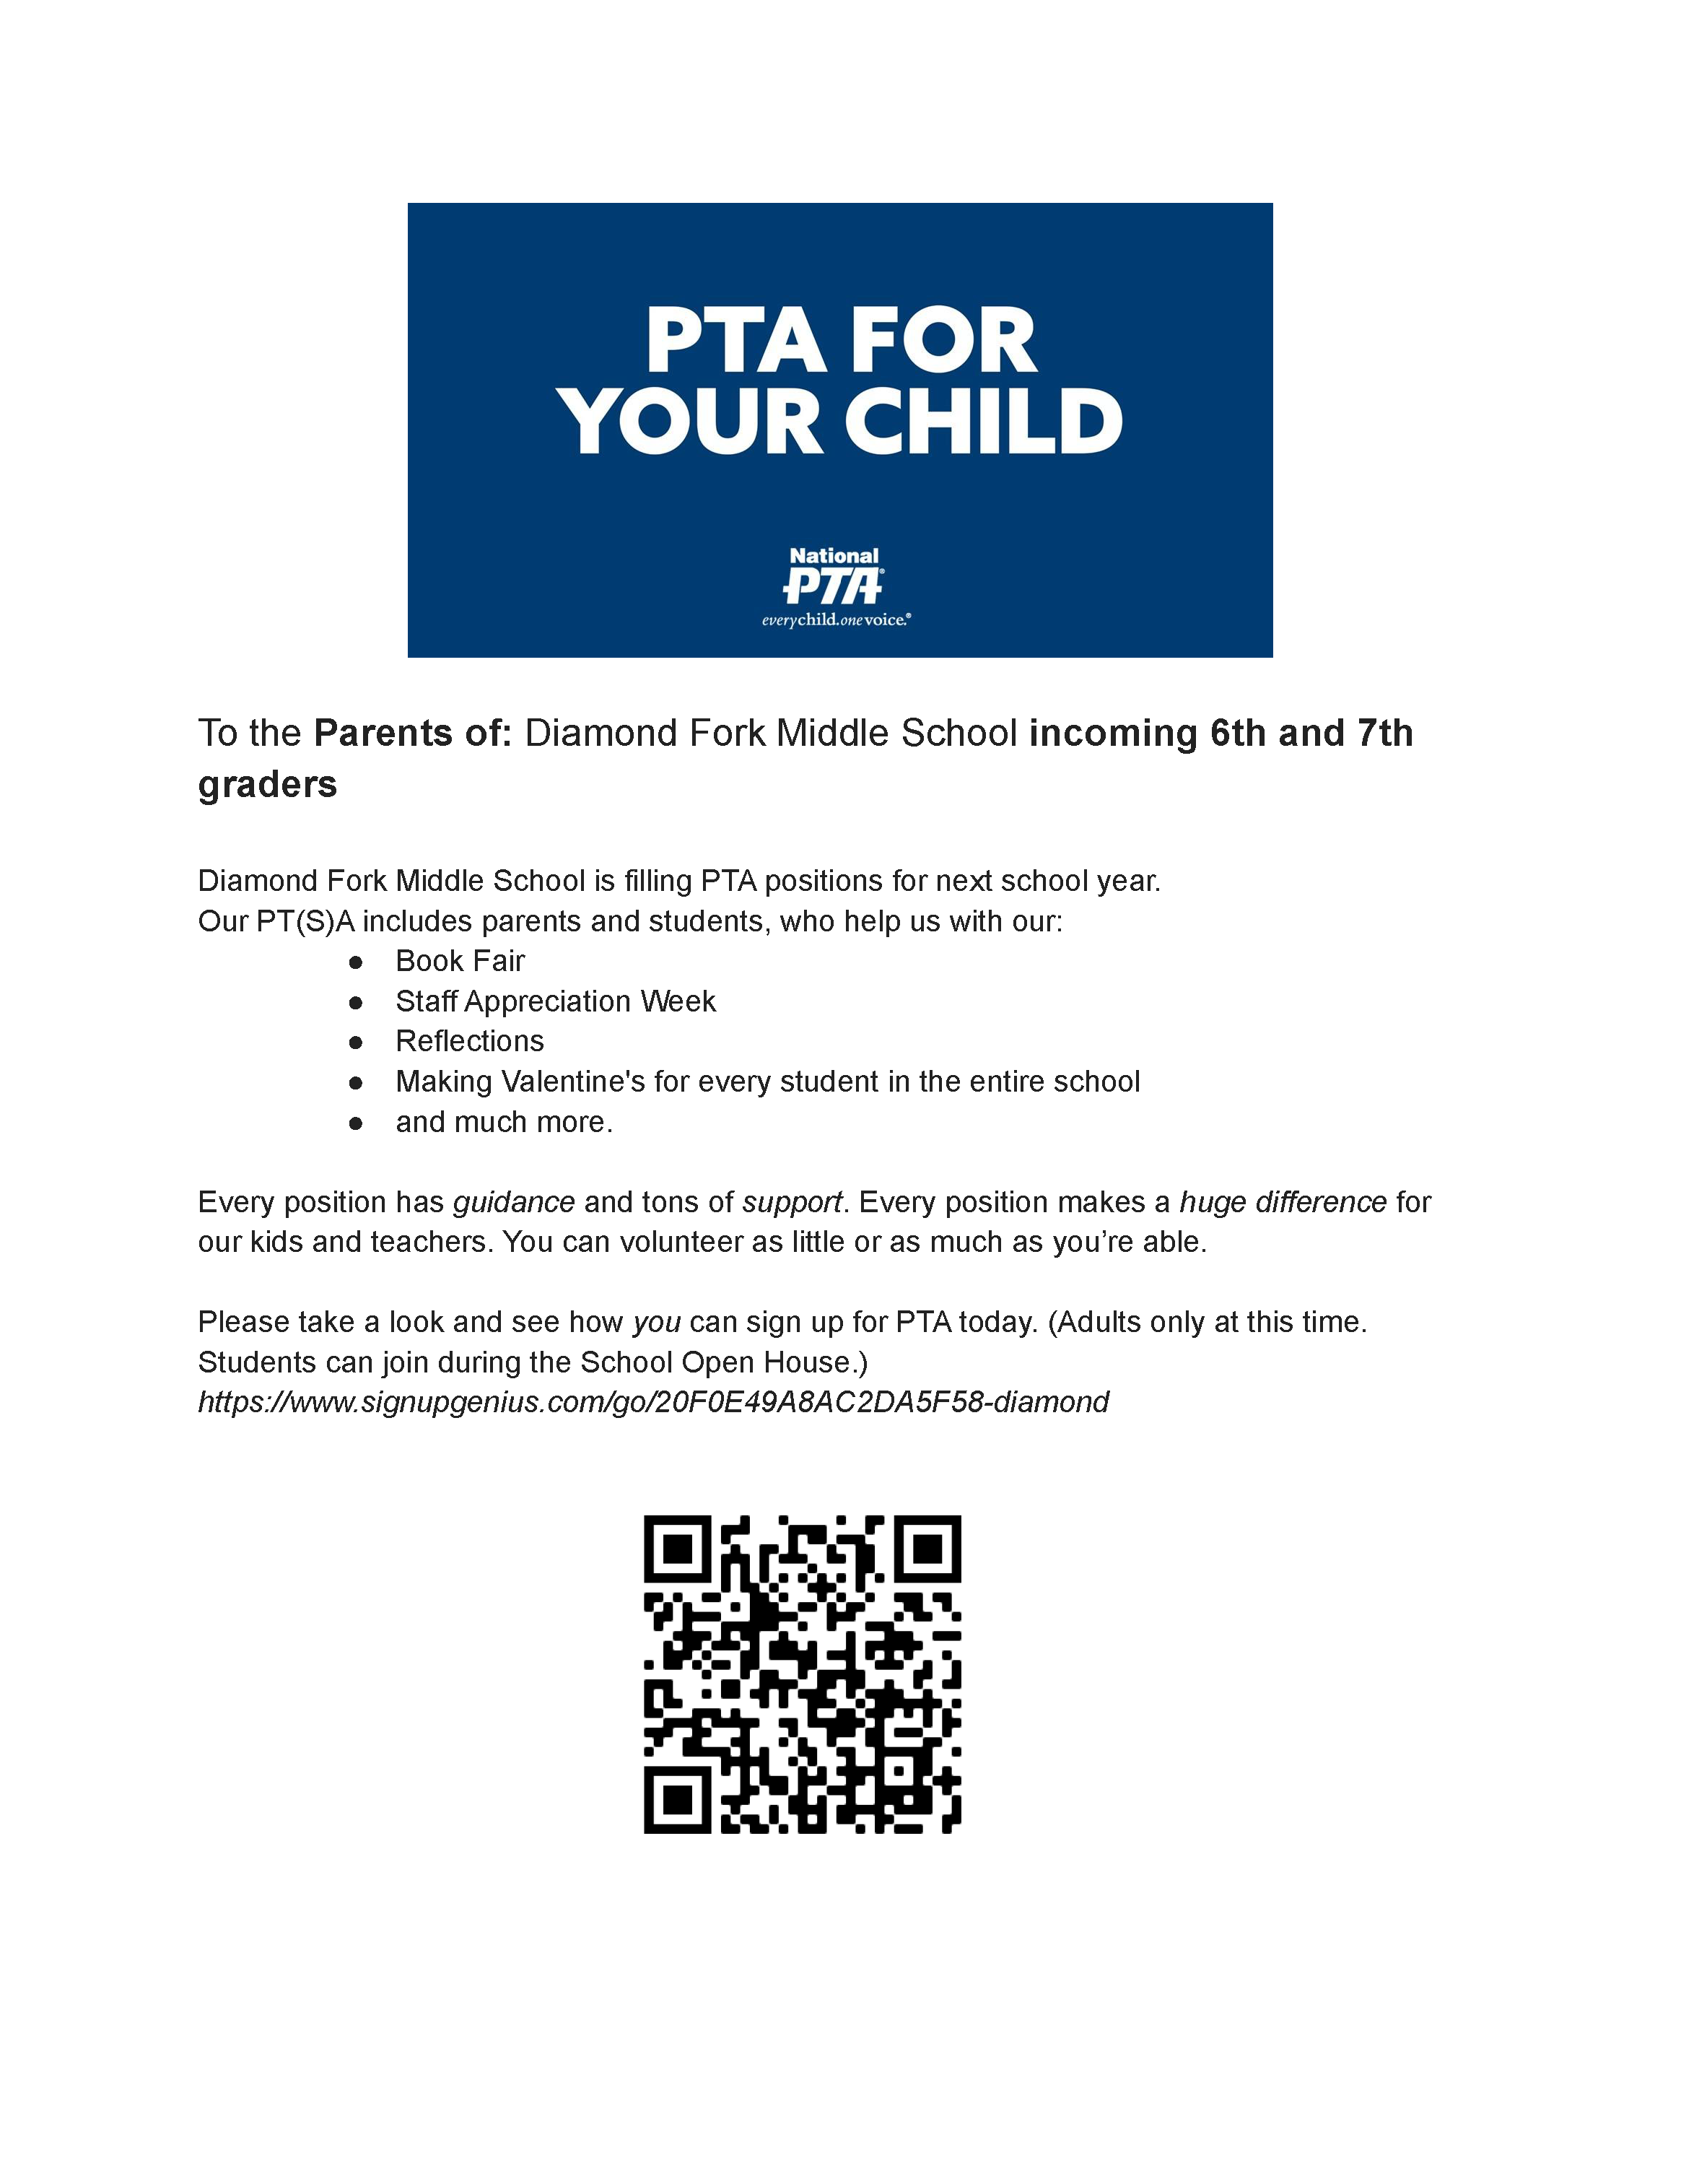 Flyer asking parents to join PTA.